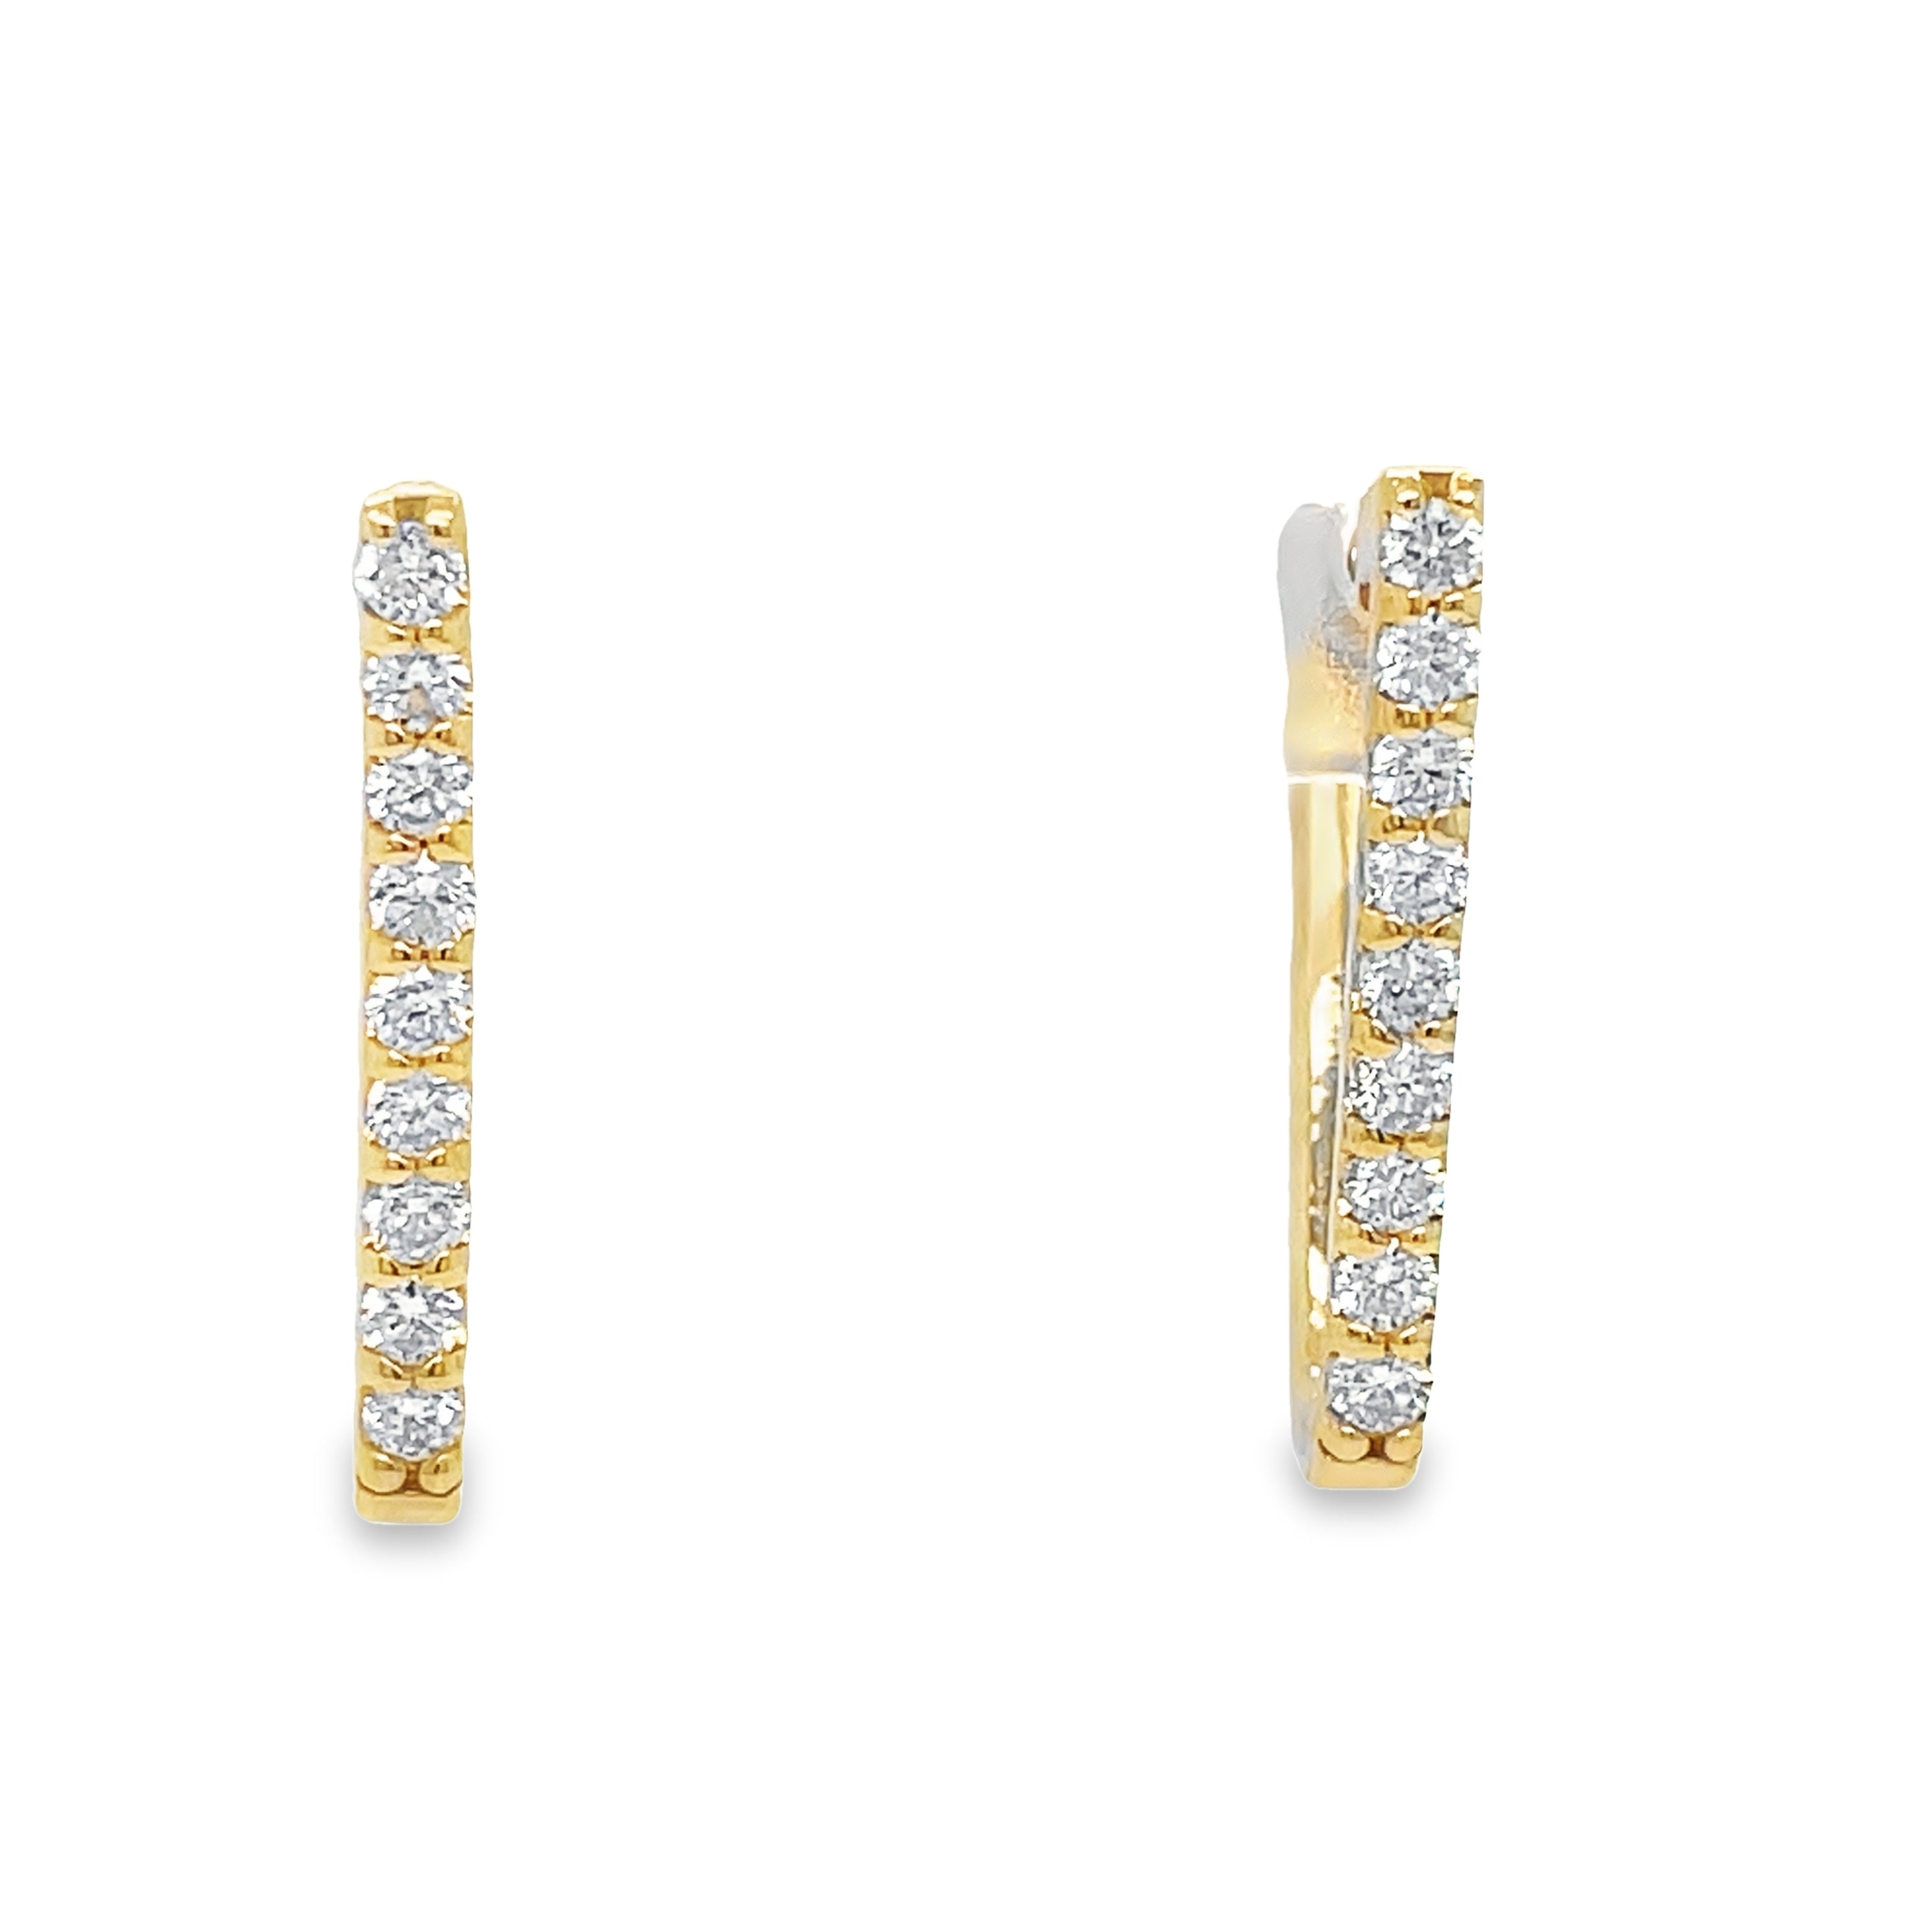 Enhance your style with these Diamond V Shape Hoop Earrings. Made of 14k yellow gold, these earrings feature a V shape design and a secure hinged system for easy wear. Adorned with 0.39 cts of round diamonds, these earrings add a touch of elegance to any outfit.